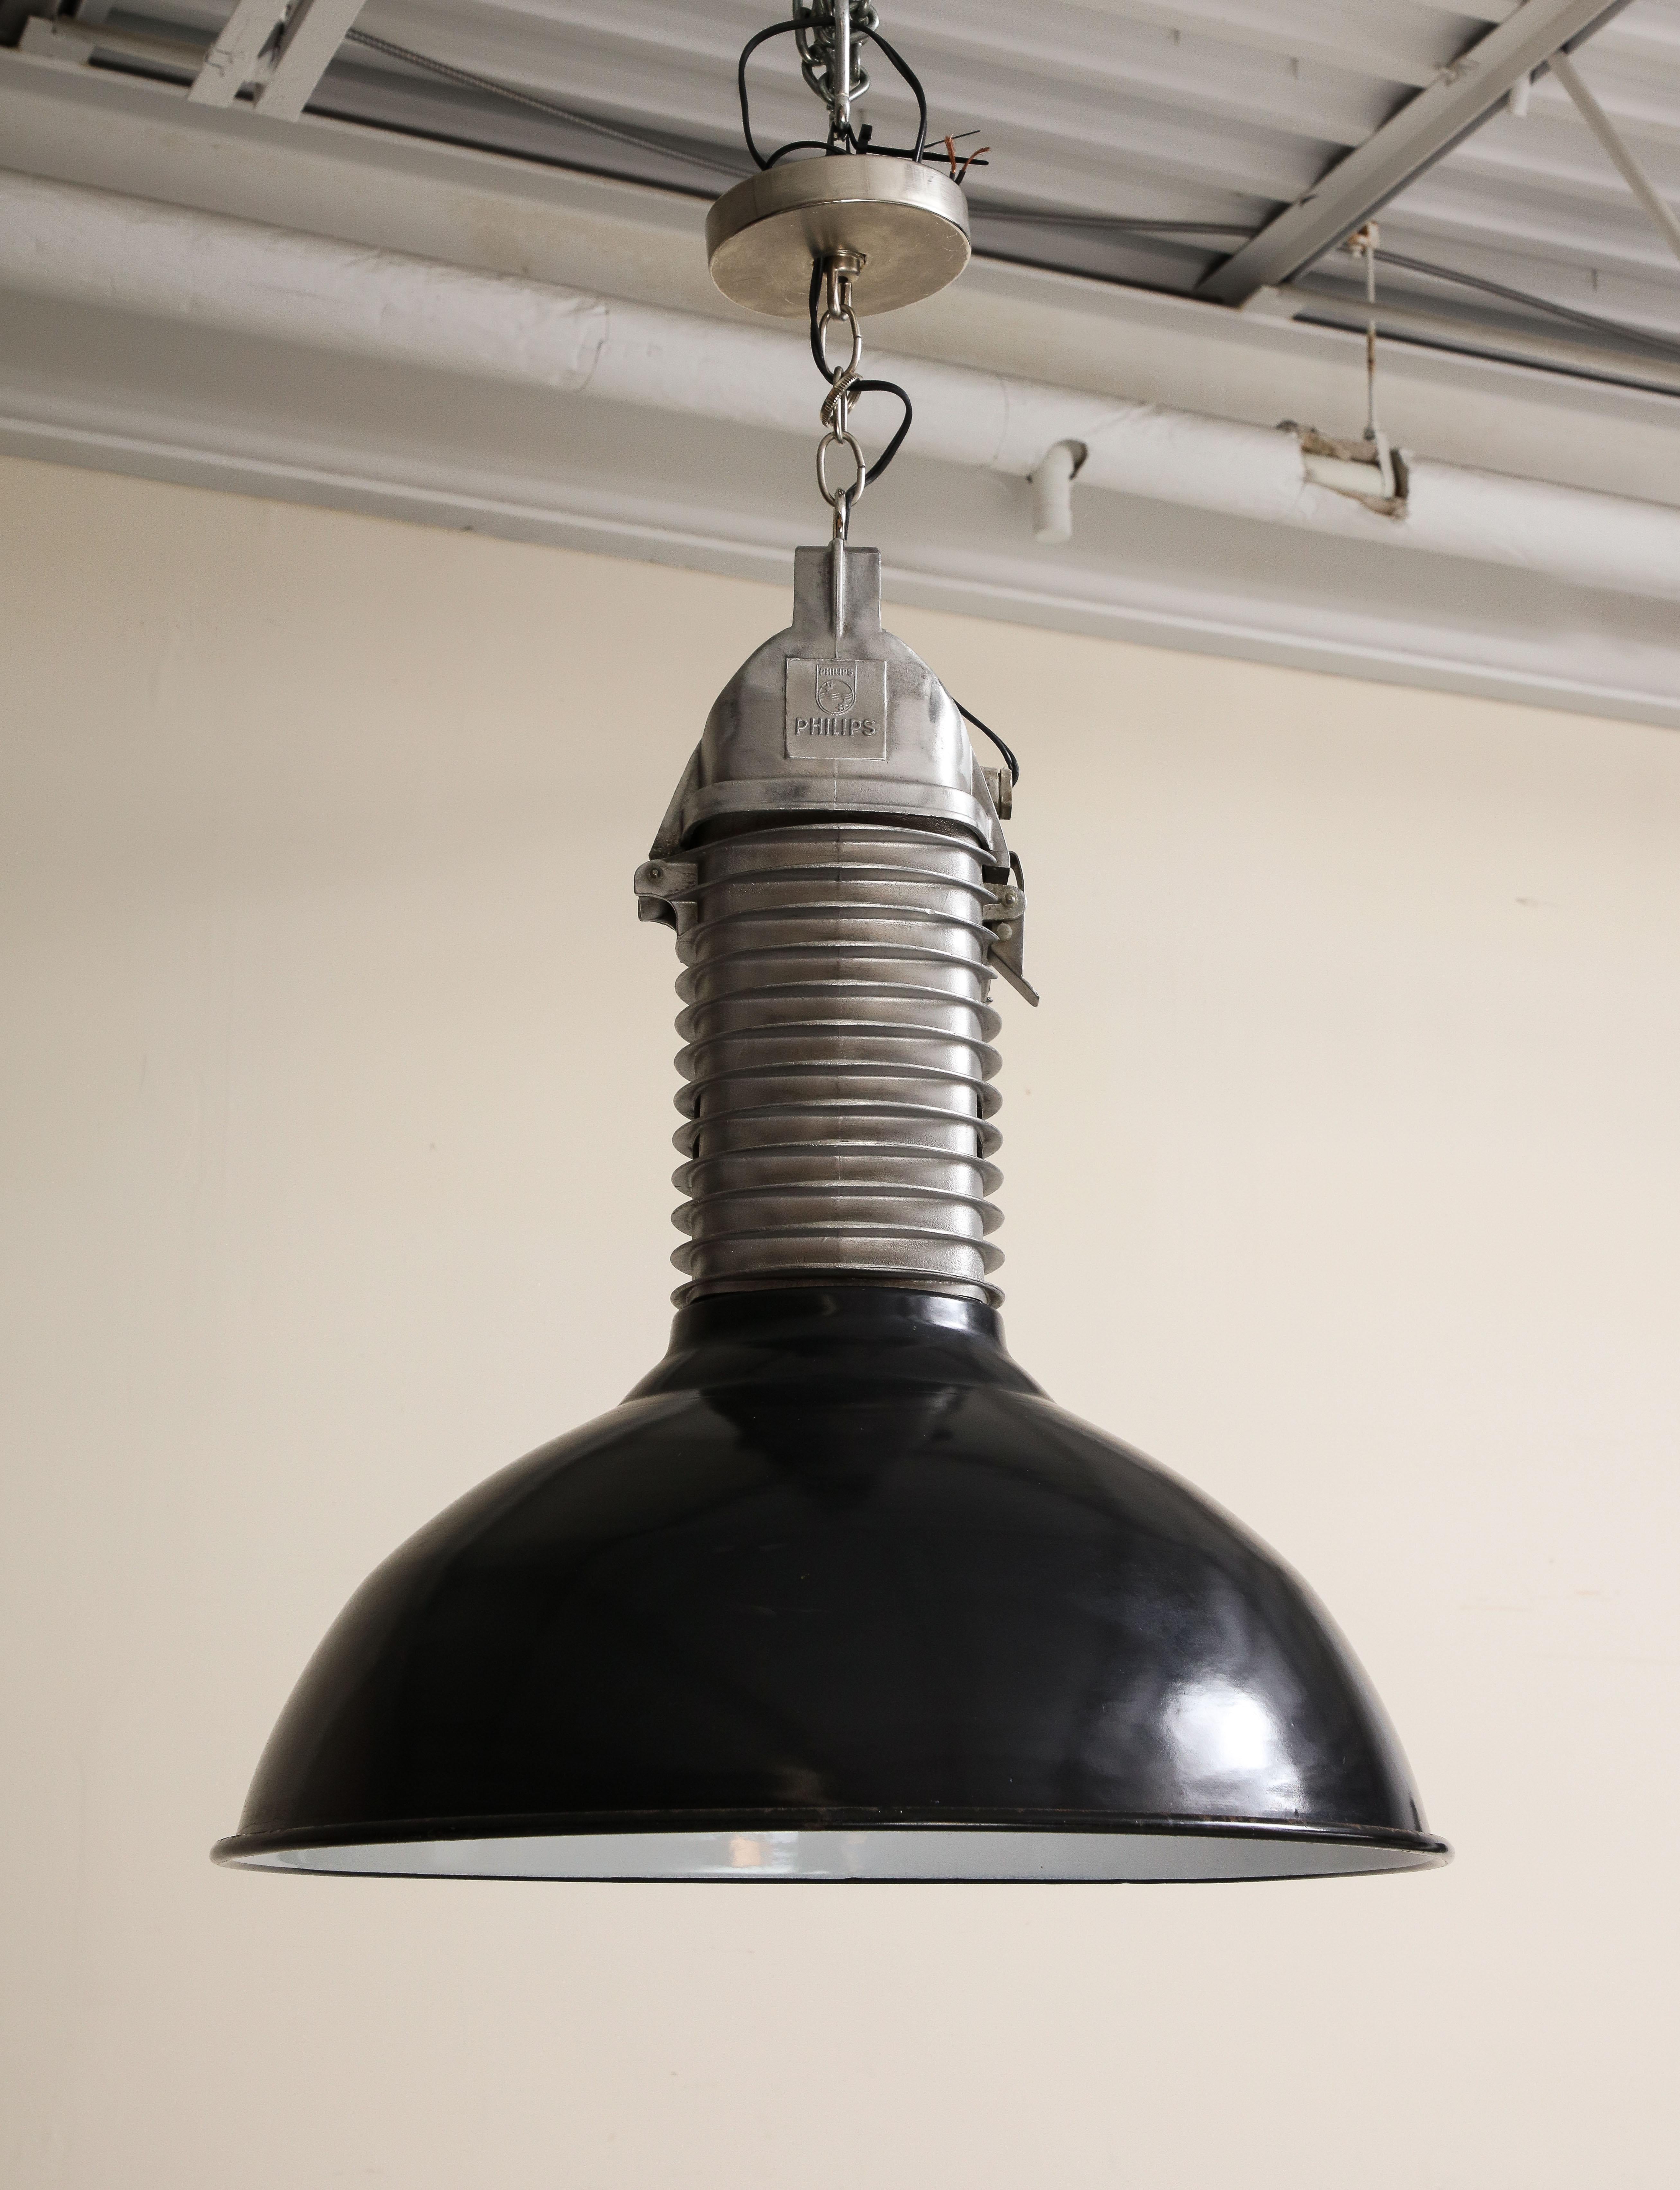 Early 20th Century Midcentury Black & White Ceiling Light with Original Enamel, c. 1920 For Sale